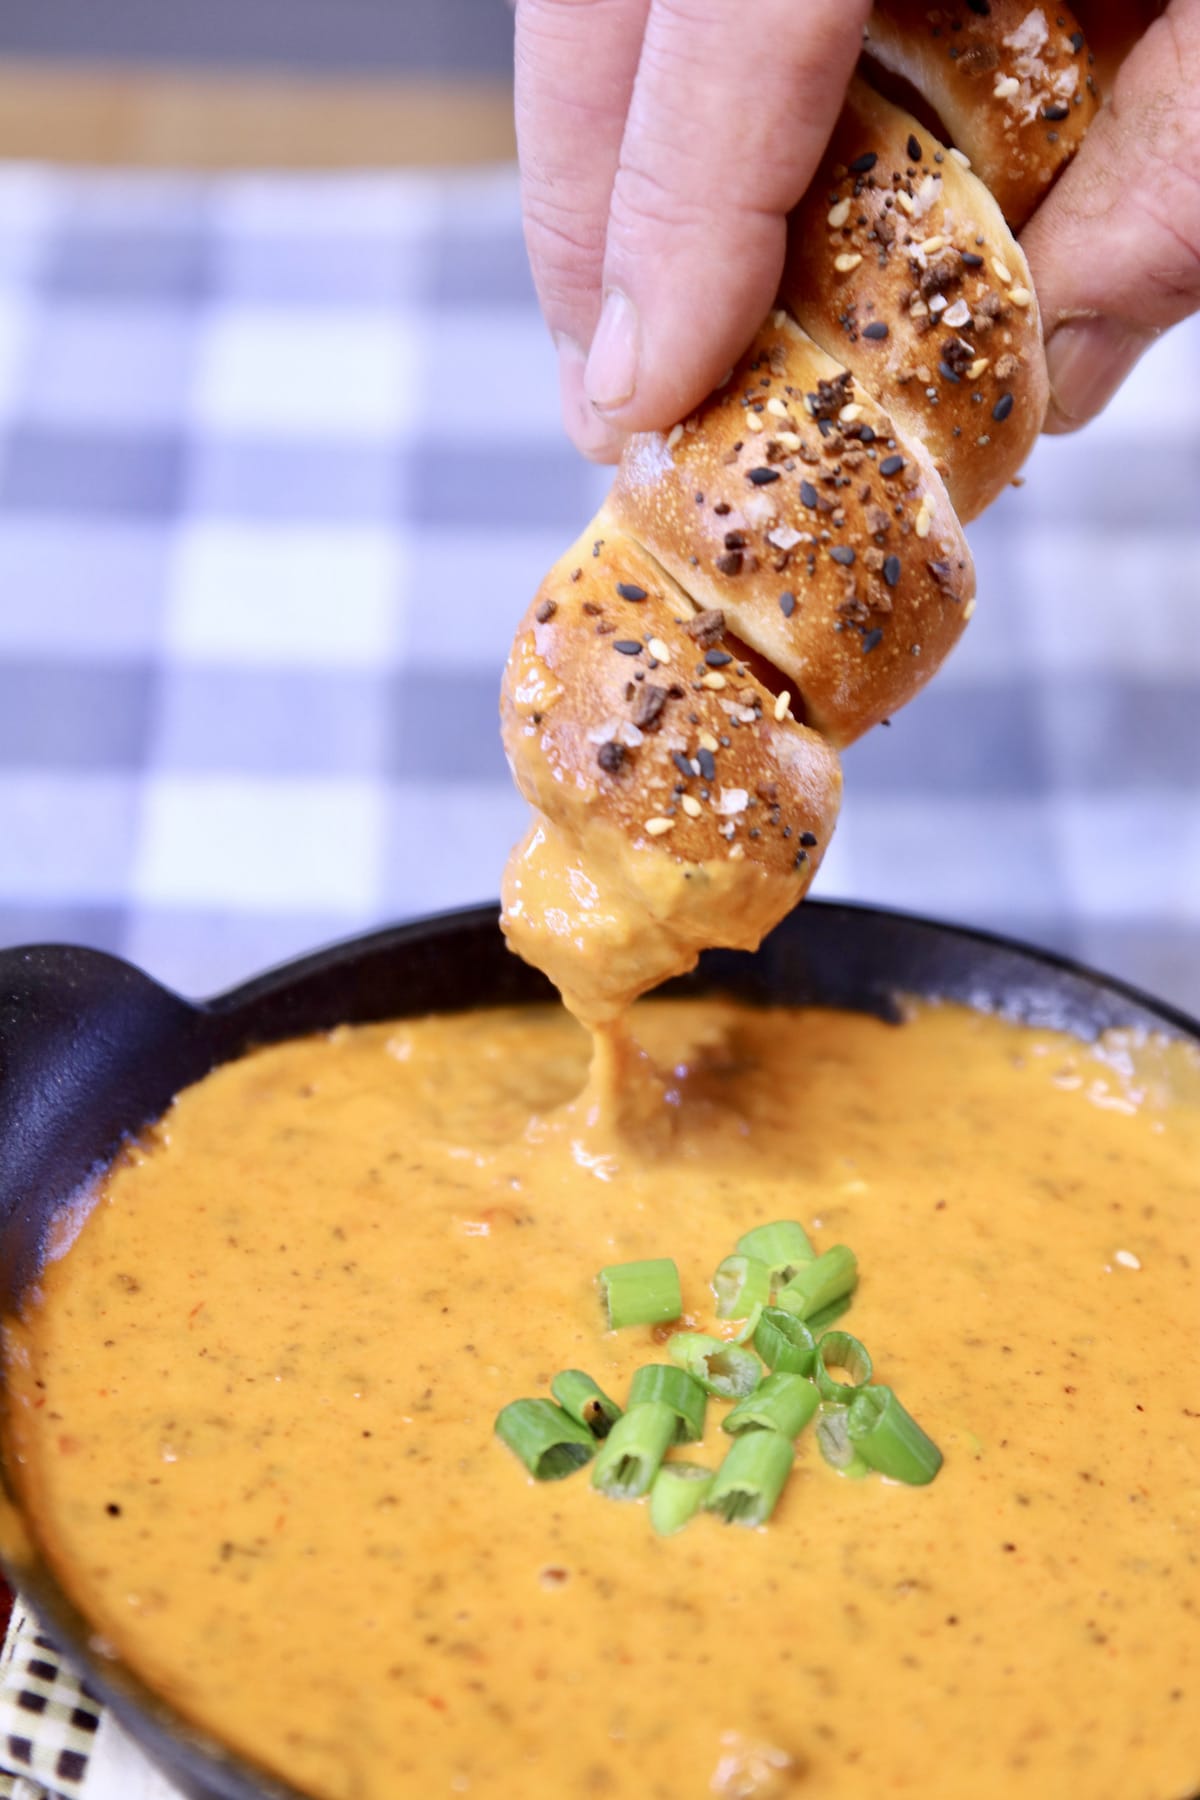 pretzel dog dipping into chili cheese dip